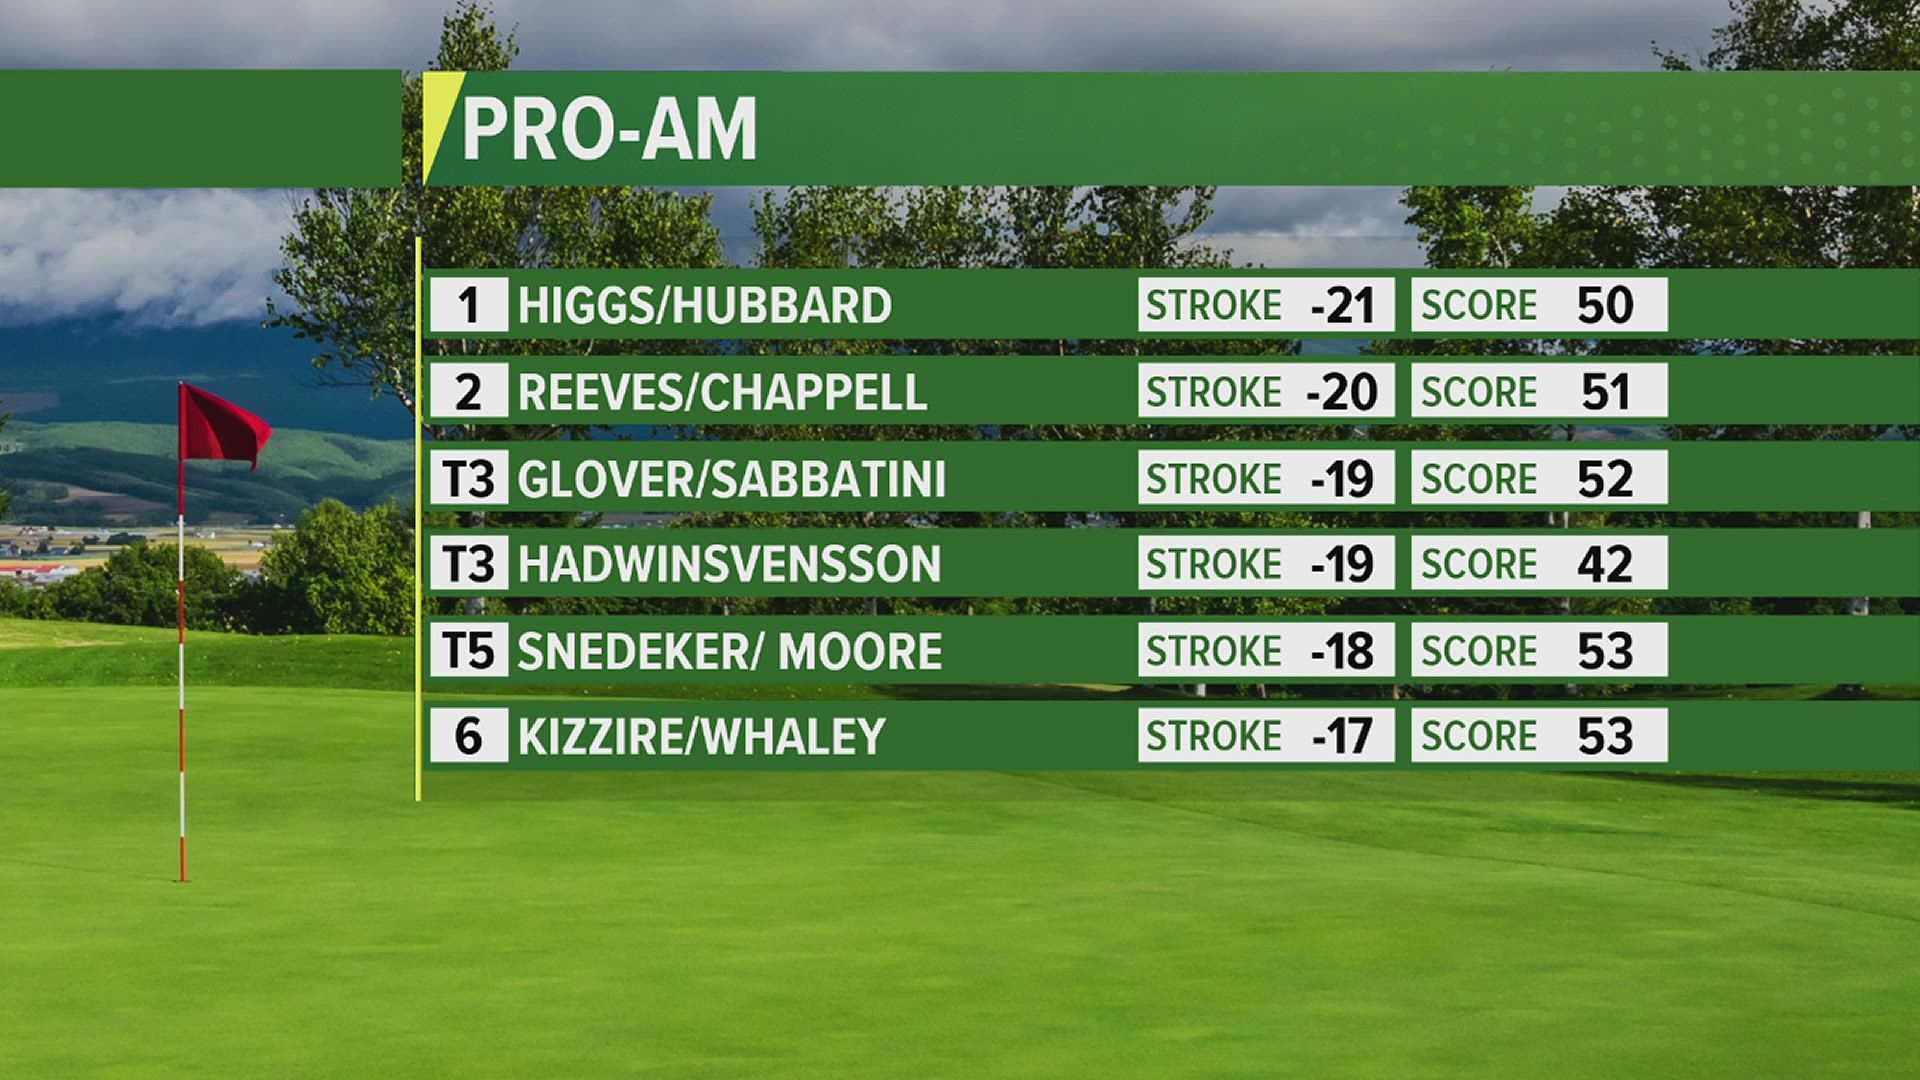 Here's a look at Wednesday's John Deere Classic Pro-Am leaderboard.